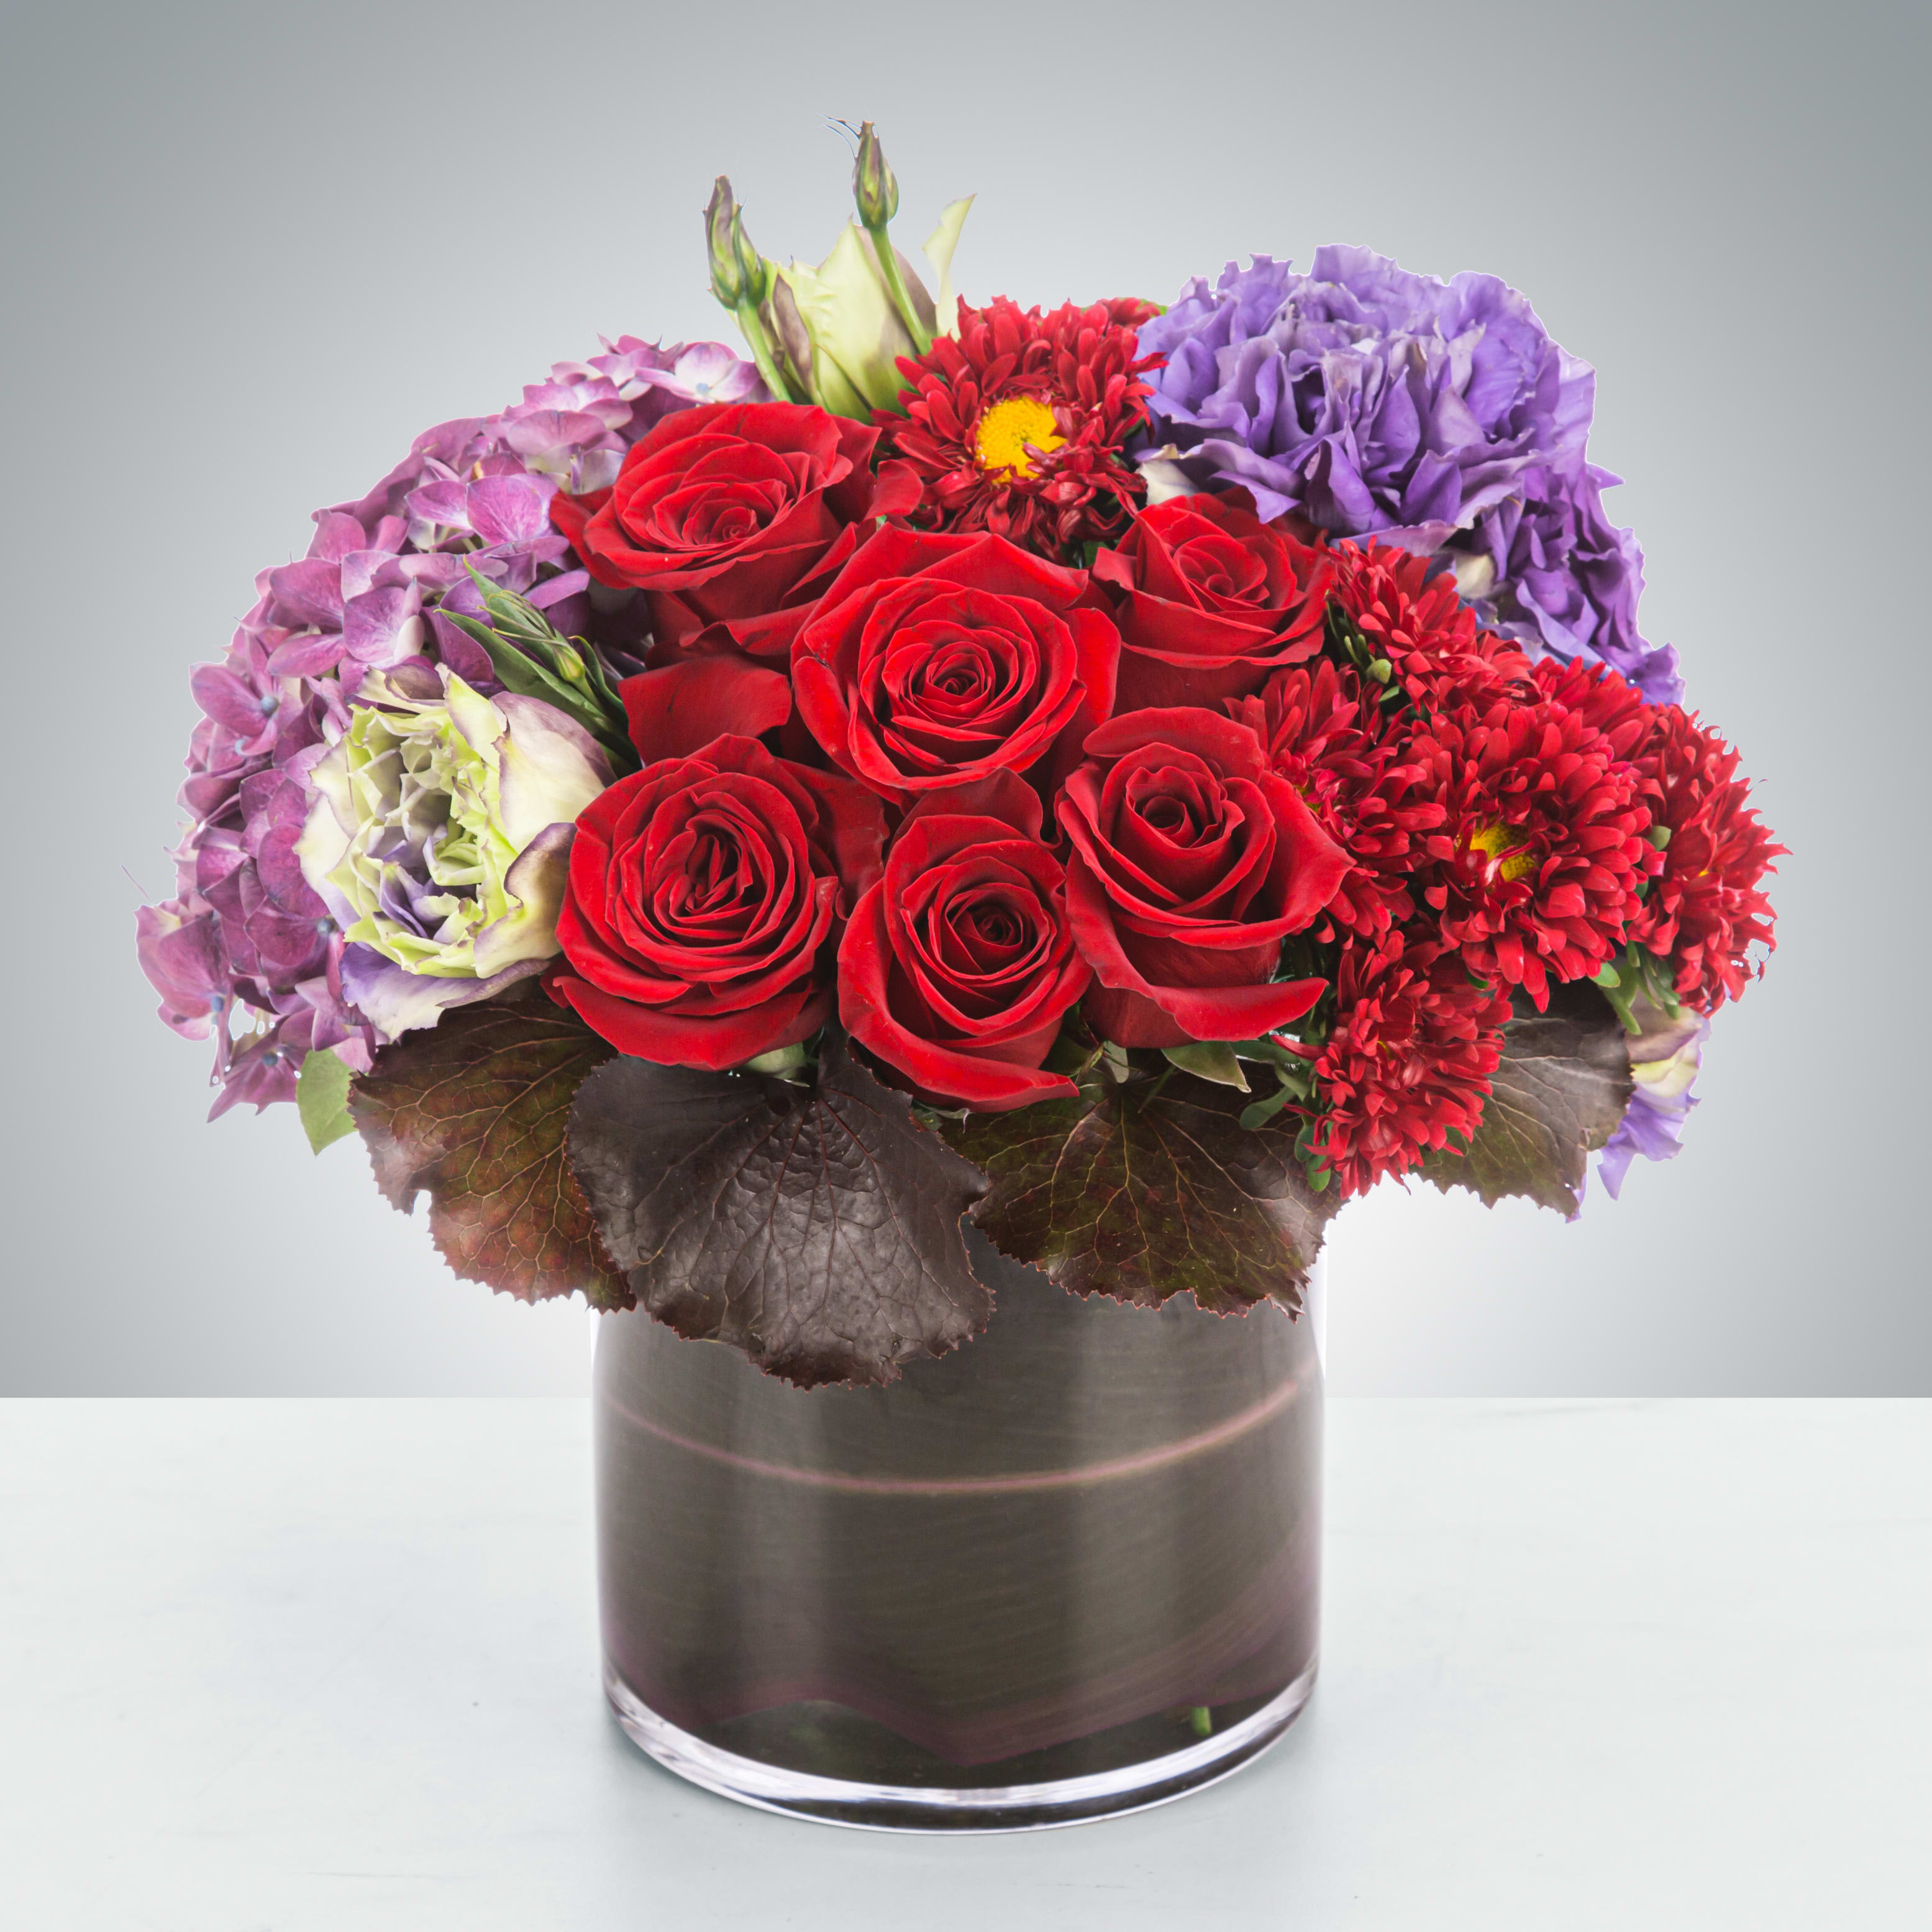 Garnet by BloomNation™ - This deep jewel tone arrangement featuring red roses, purple hydrangea and purple lisianthus is a dream. Garnets symbolize higher thinking and are the birthstone for January making this a great wintertime birthday present or congratulations for an academic or career win.  Approximate Dimensions: 11&quot;D x 11&quot;H